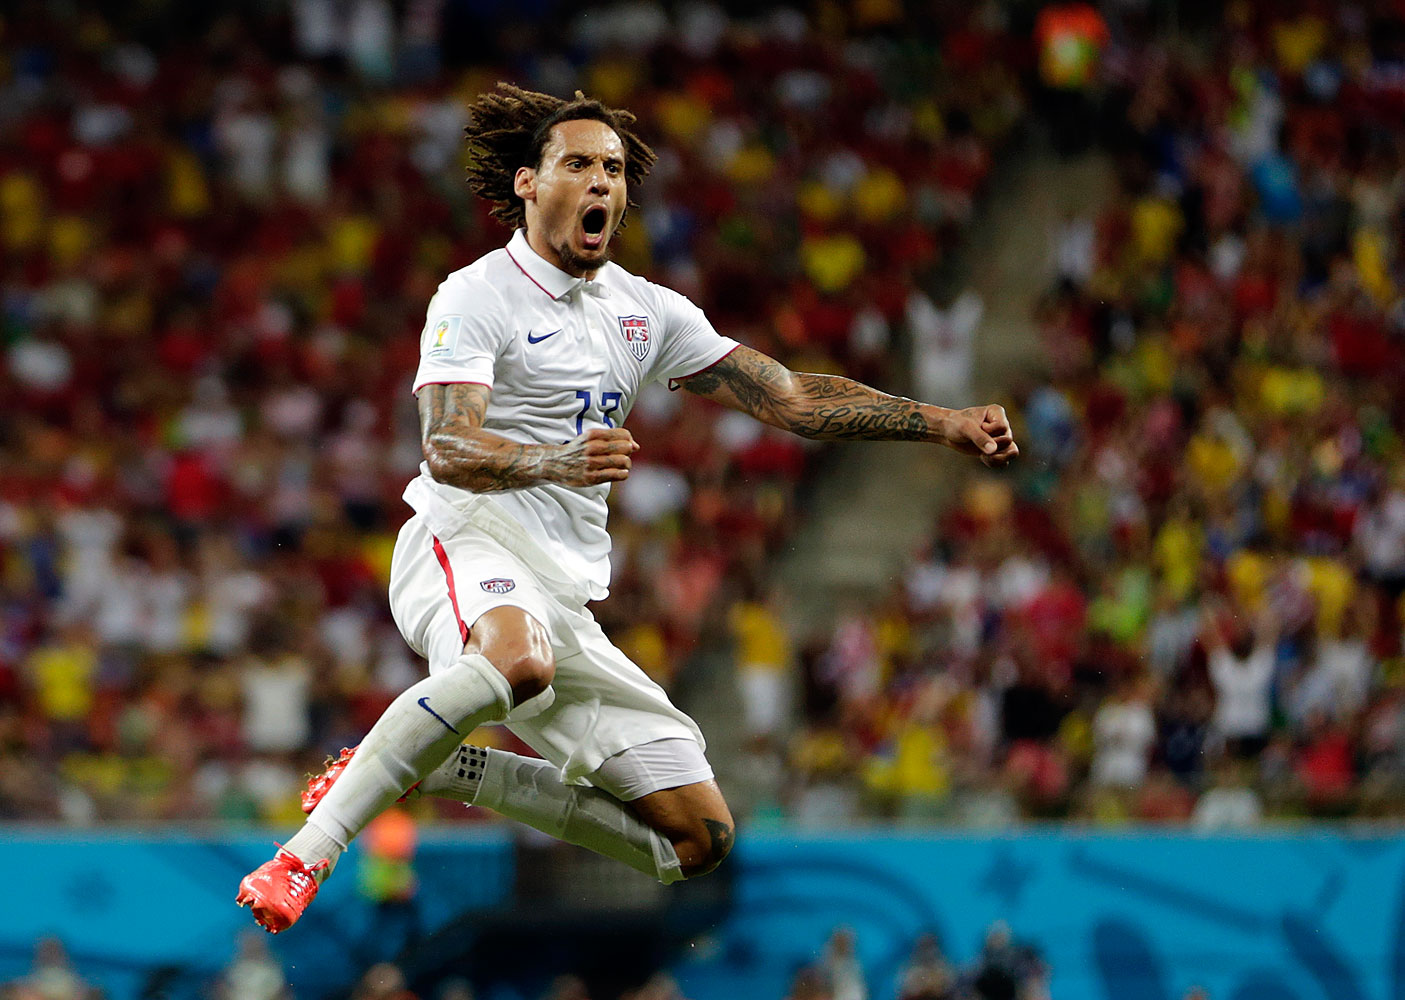 Jermaine Jones celebrates after scoring during a Group G match between U.S. and Portugal at the 2014 FIFA World Cup at the Arena Amazonia Stadium in Manaus, Brazil on June 22, 2014.